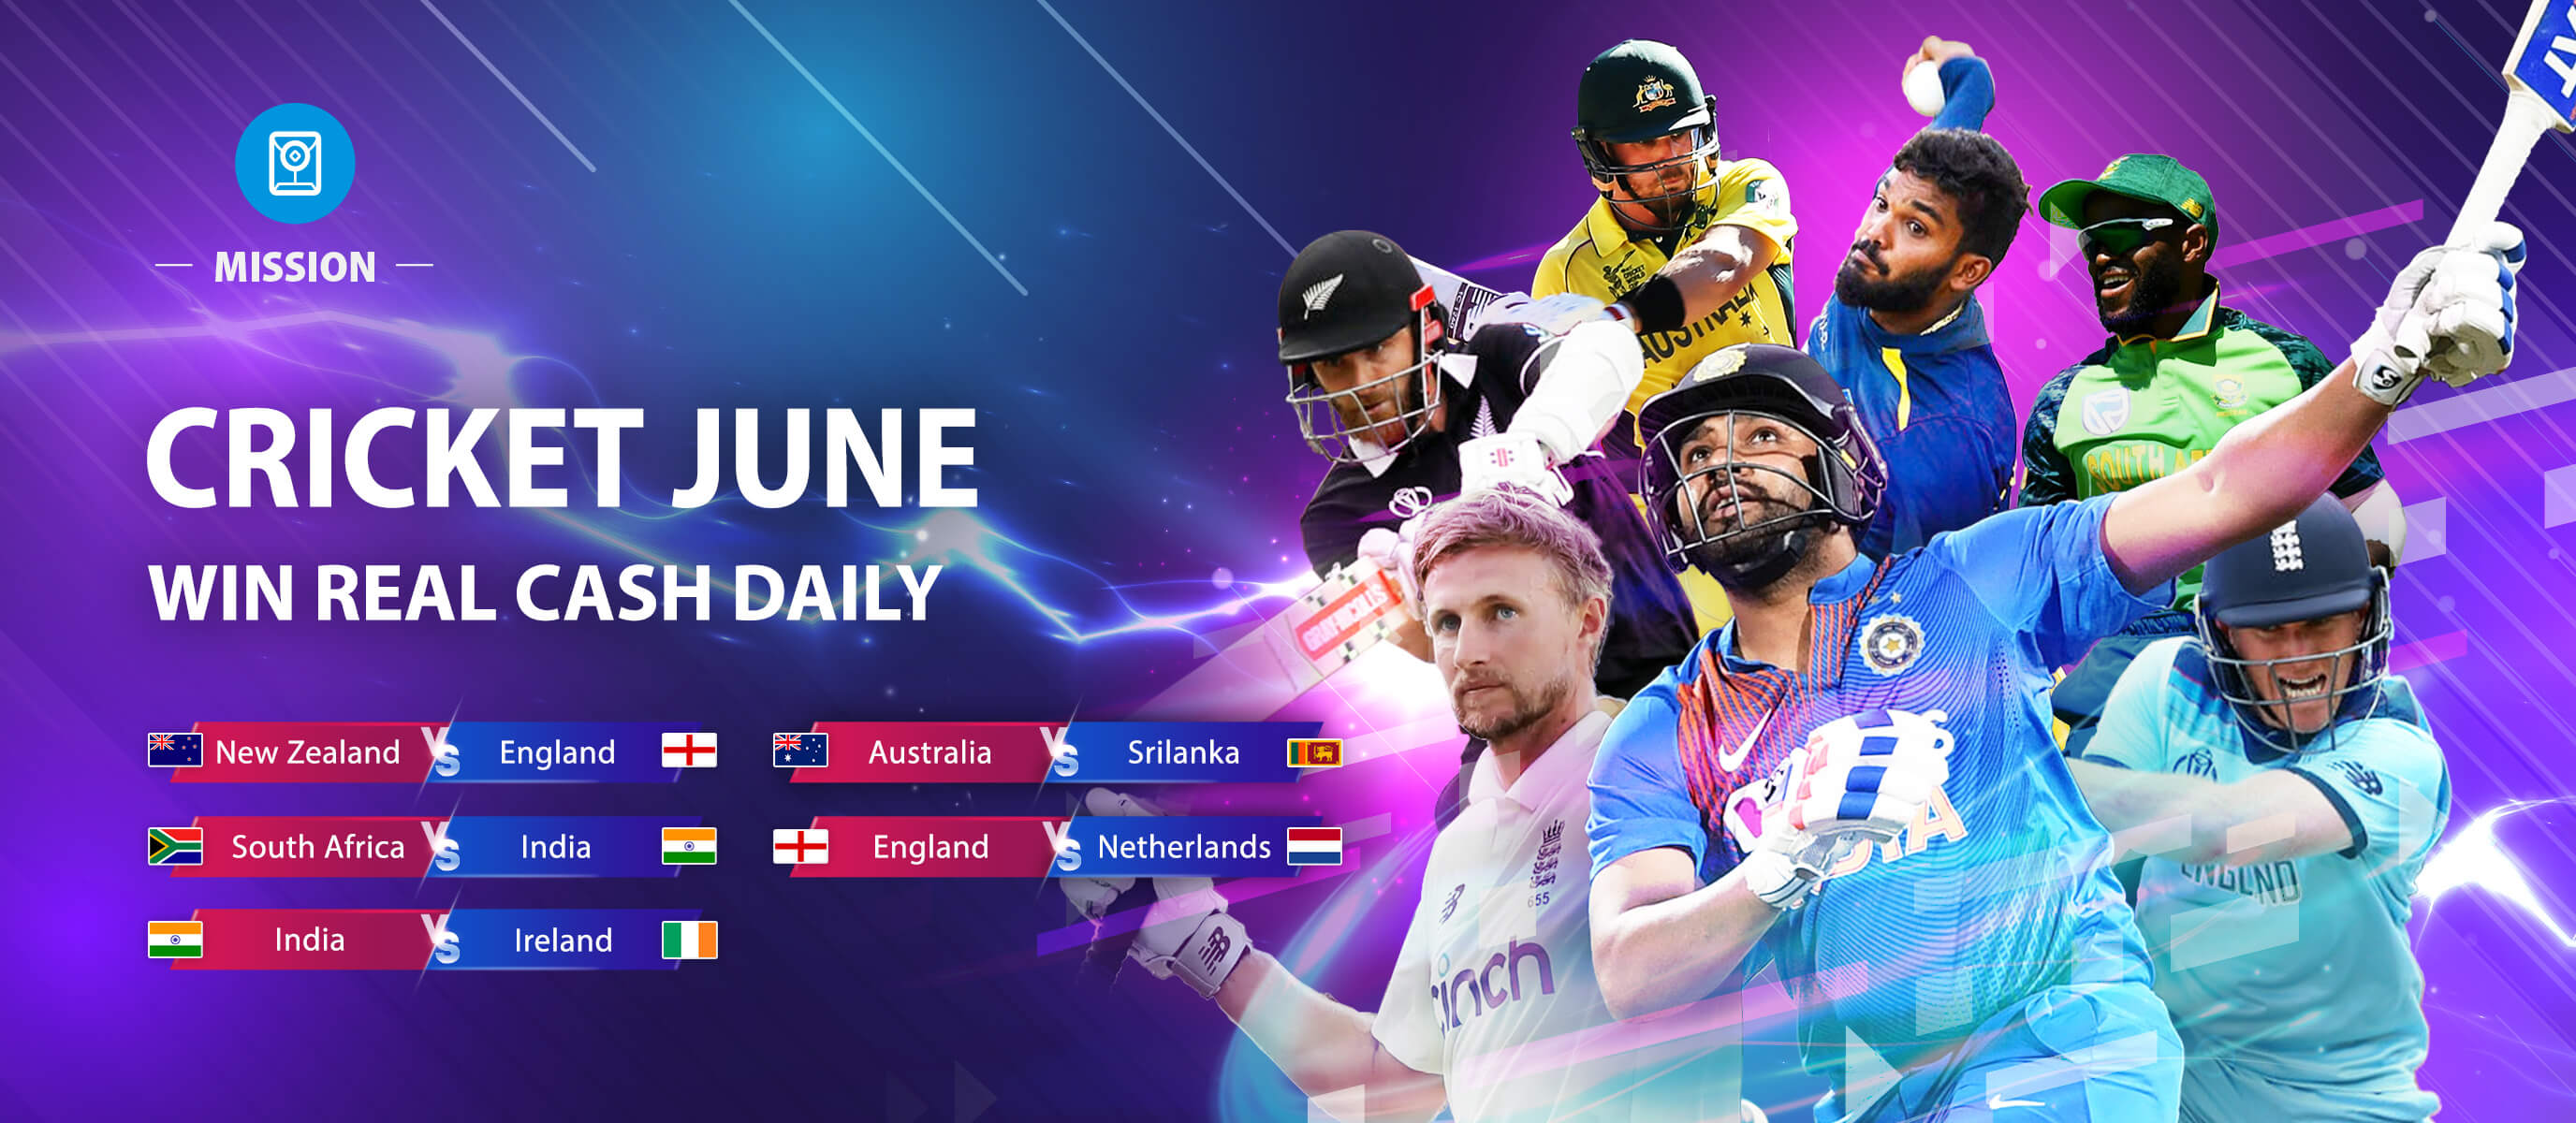 What Are The 5 Main Benefits Of 365 bet cricket app